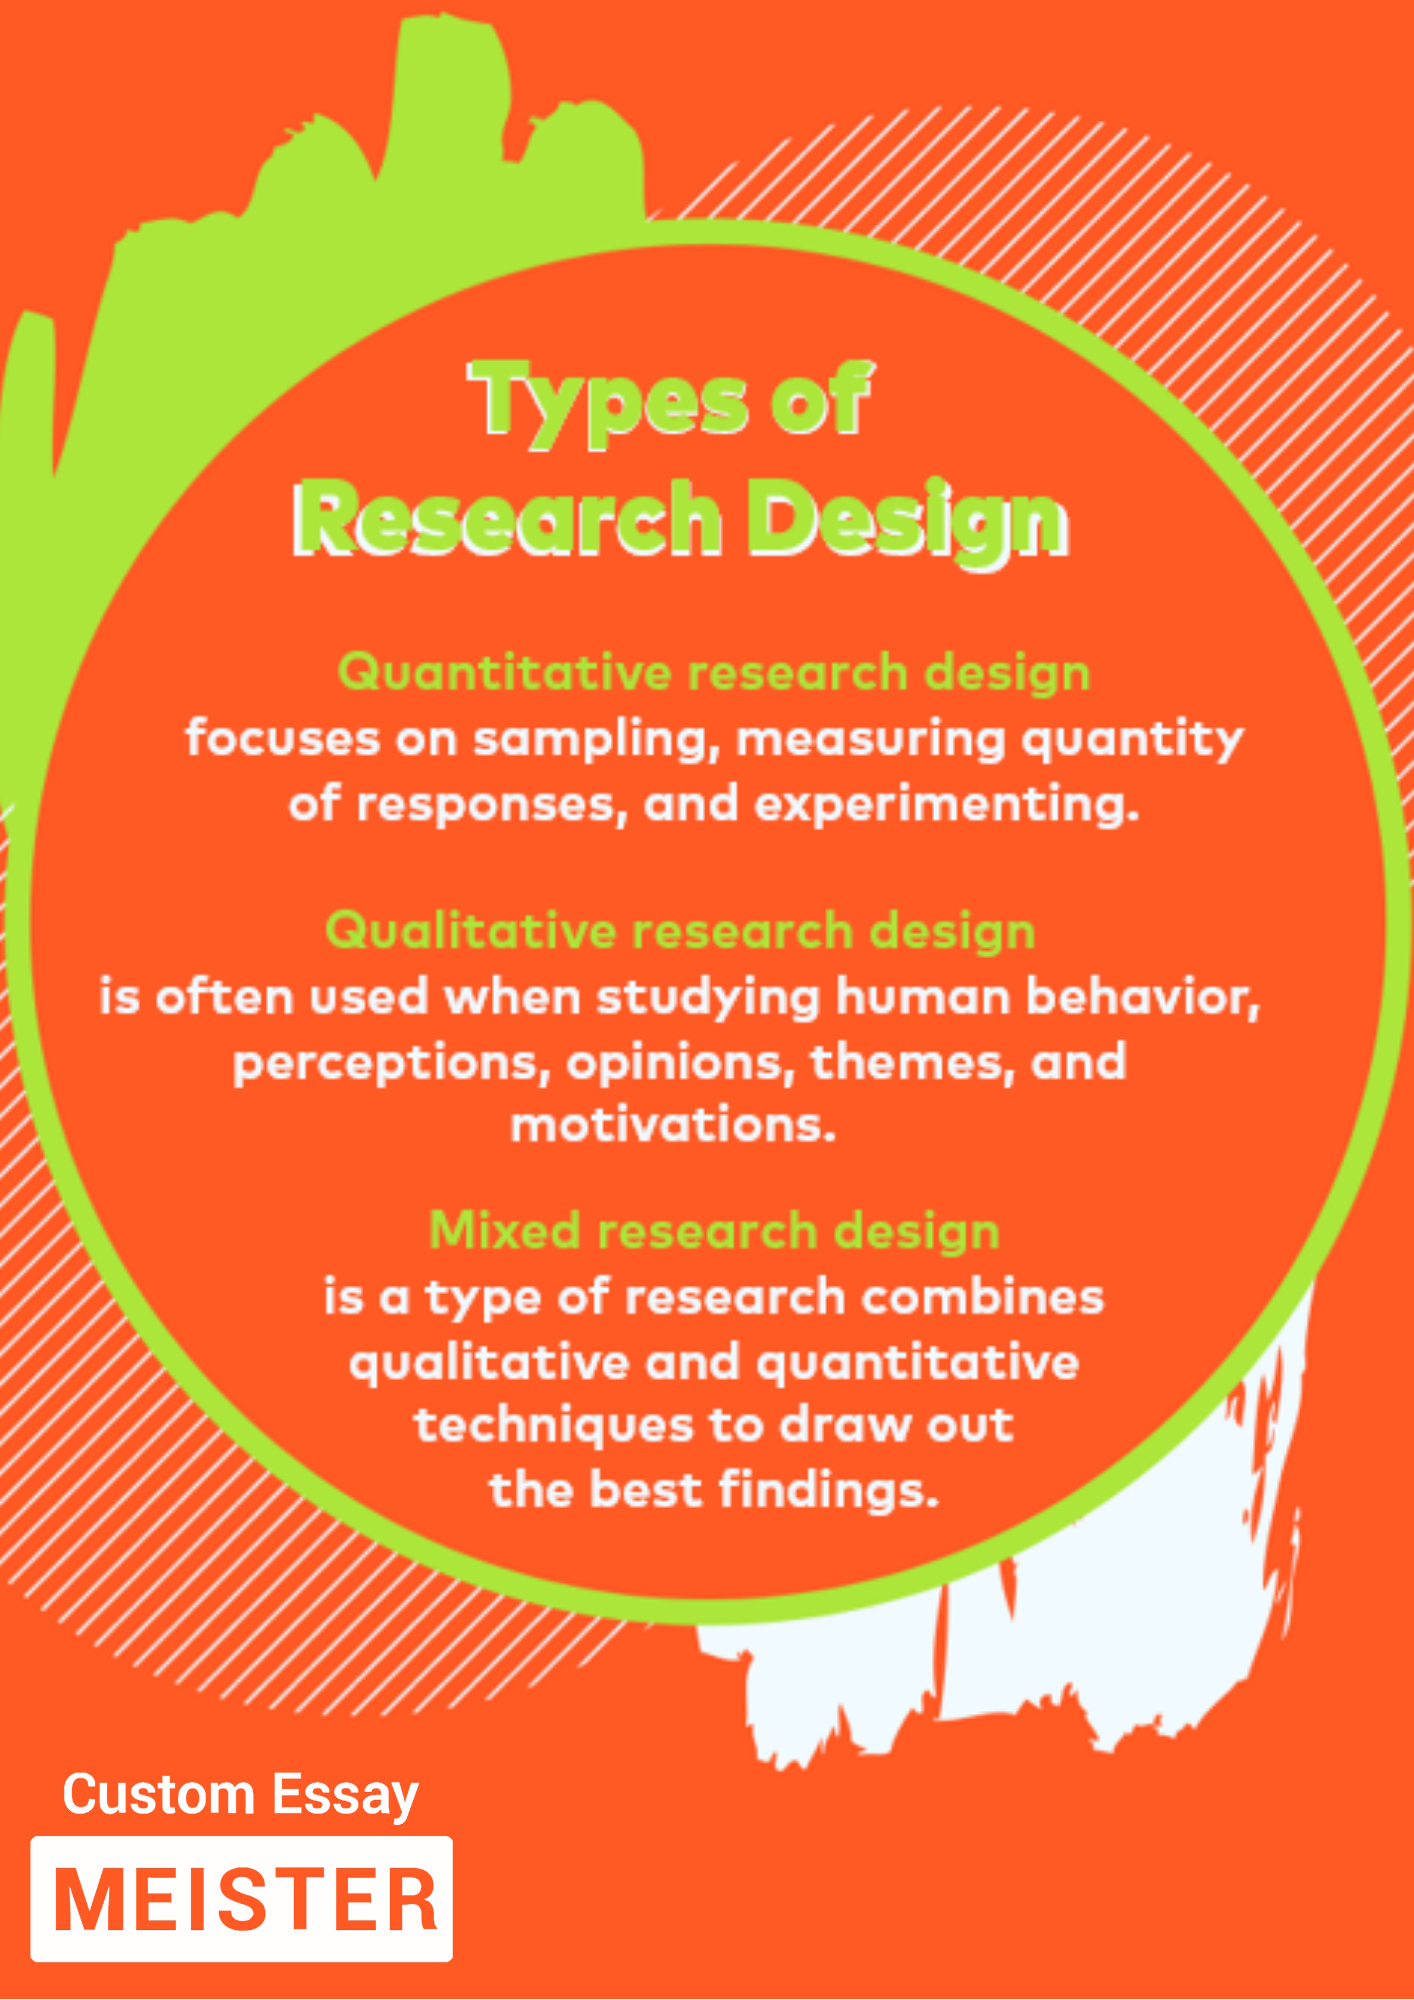 How to create a strong research design